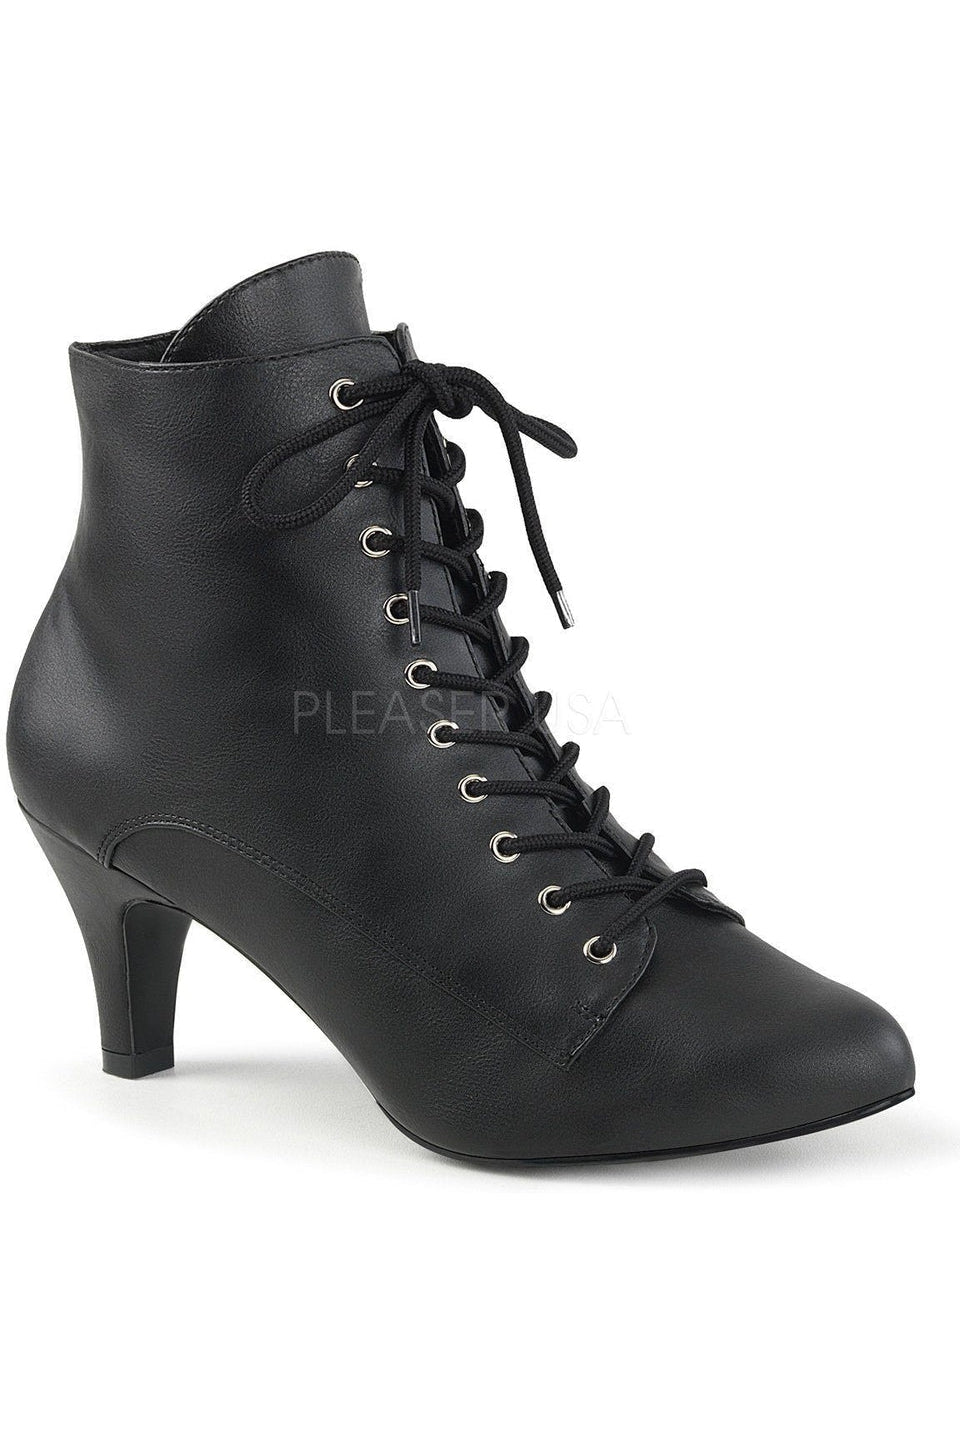 DIVINE-1020 Ankle Boot | Black Faux Leather-Pleaser Pink Label-Black-Ankle Boots-SEXYSHOES.COM